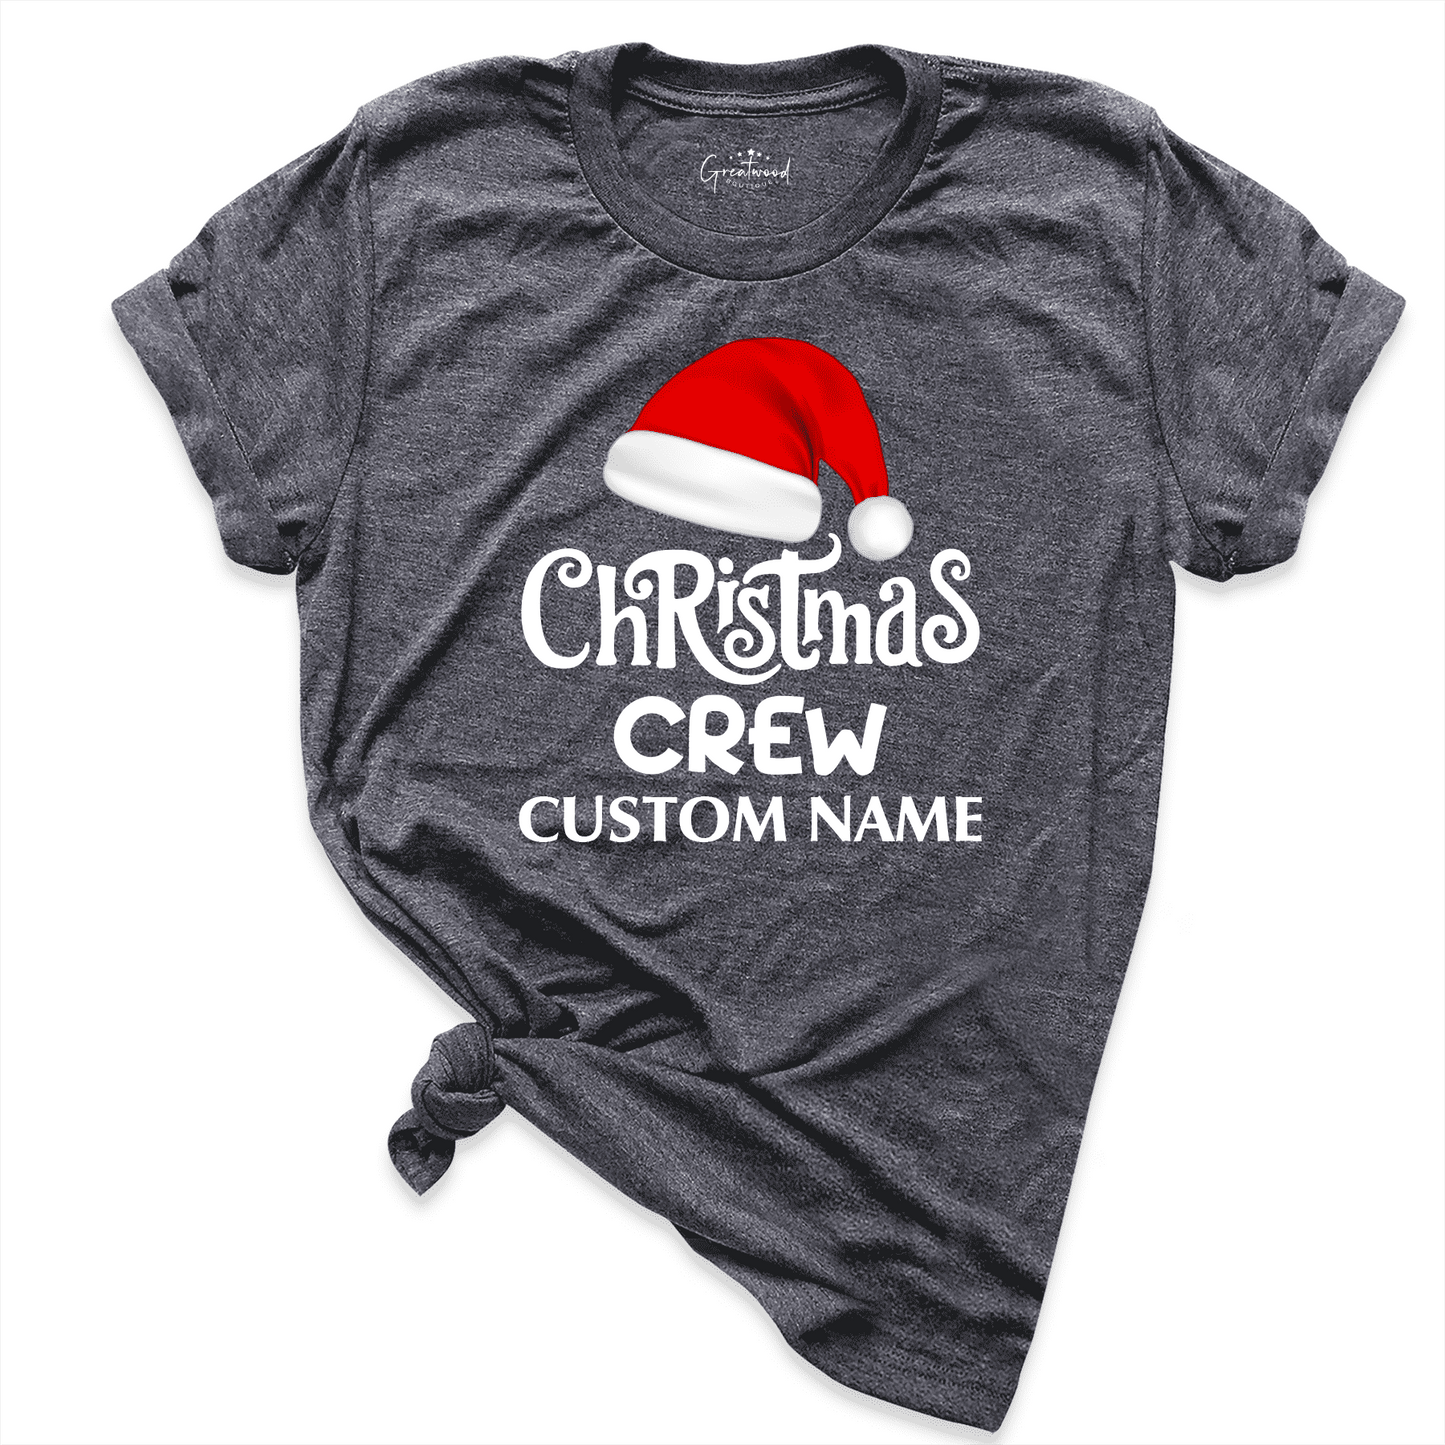 Custom Name Christmas Crew Shirt D.grey - Greatwood Boutique